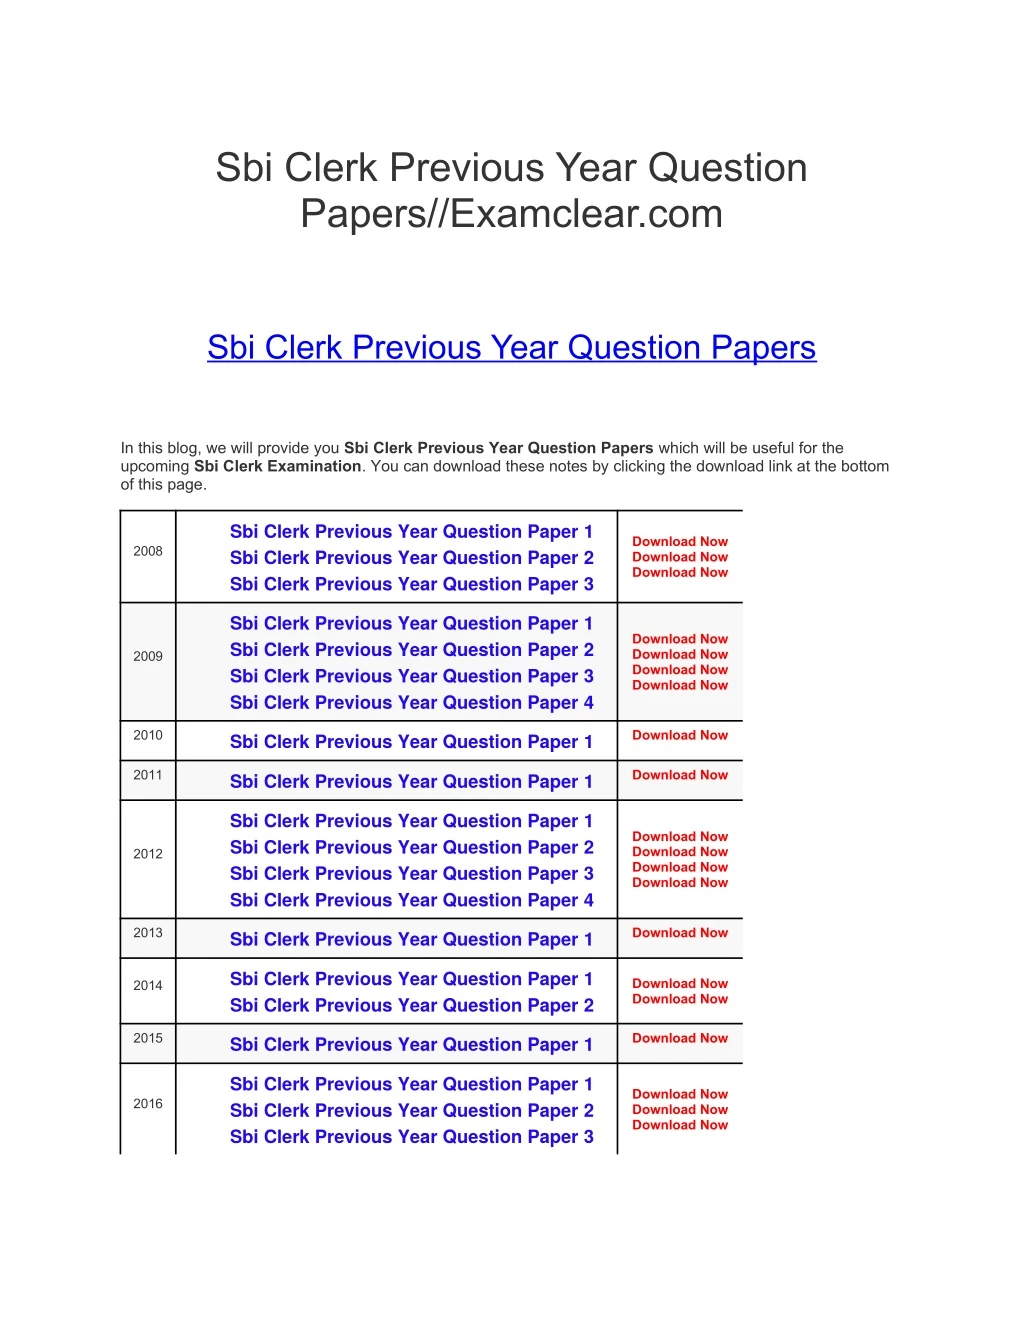 sbi clerk previous year question papers examclear